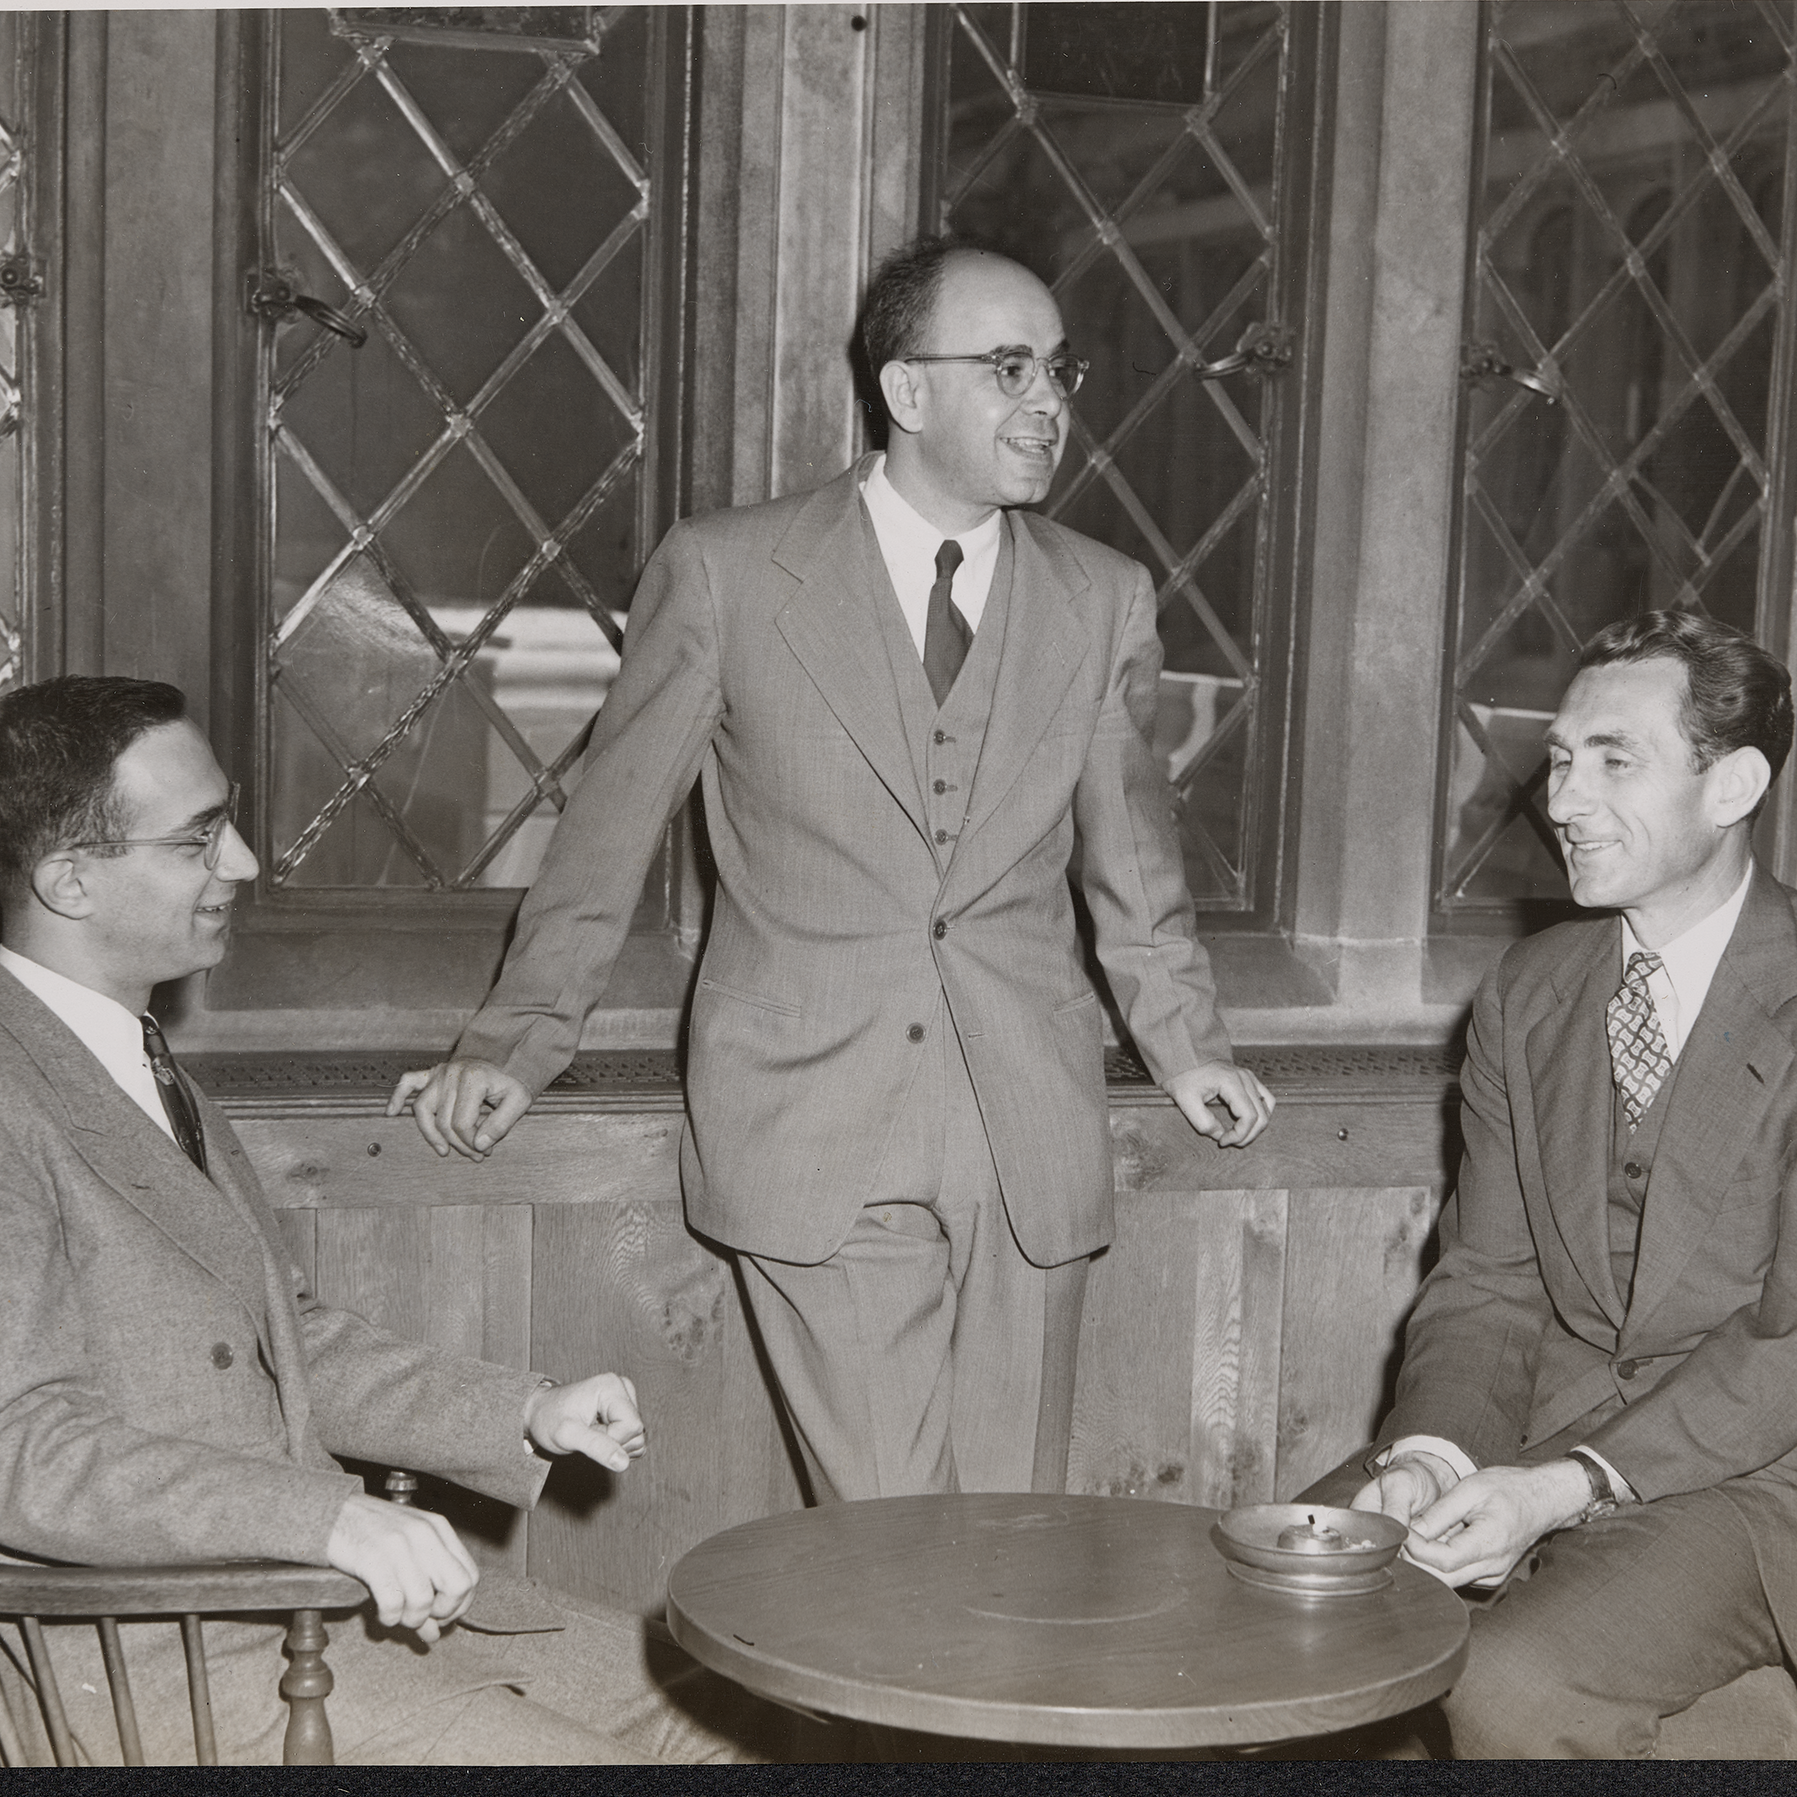 A black and white photo of three men in 1951